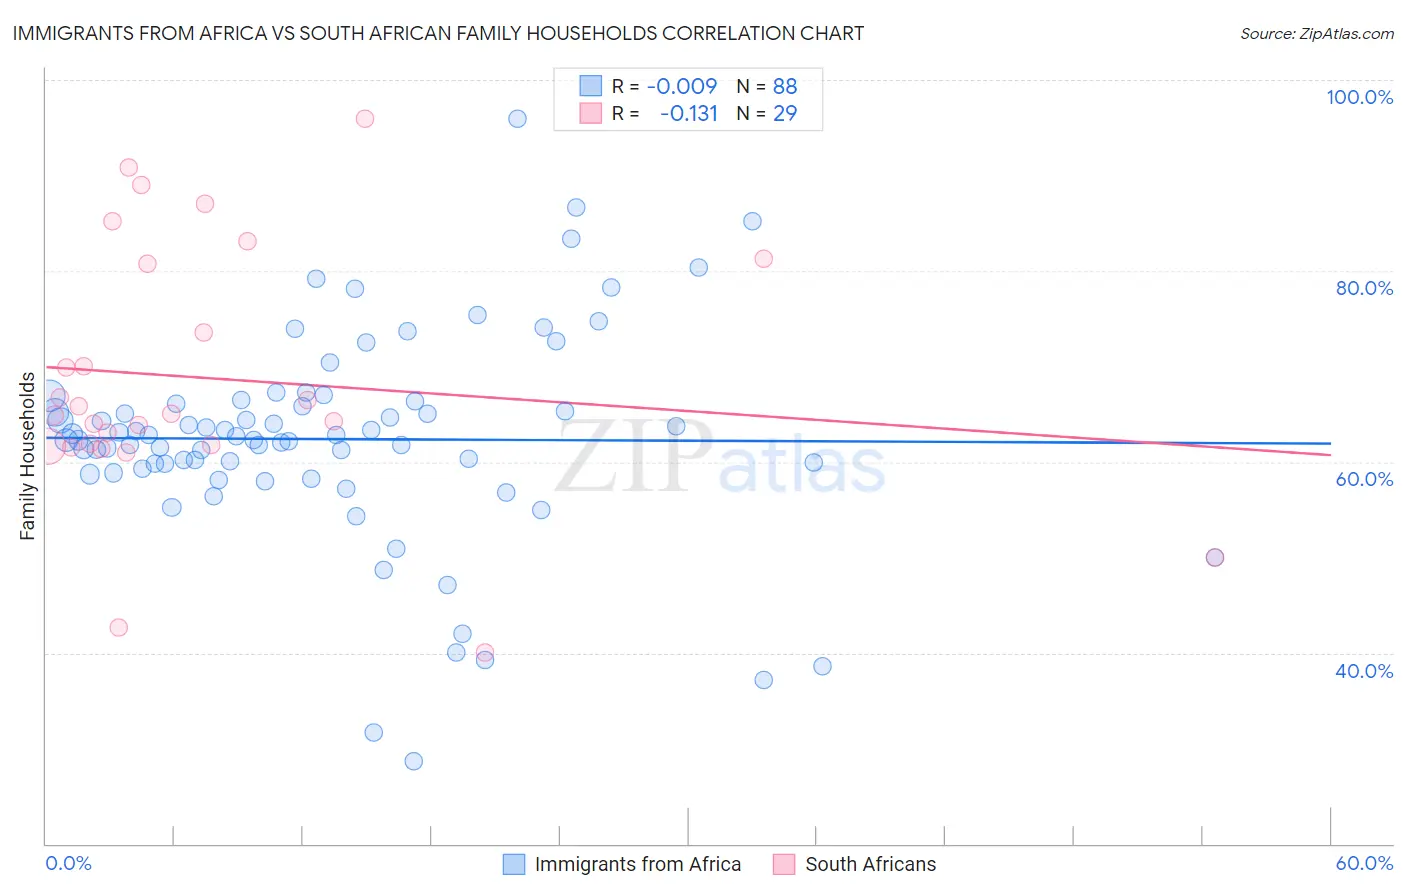 Immigrants from Africa vs South African Family Households